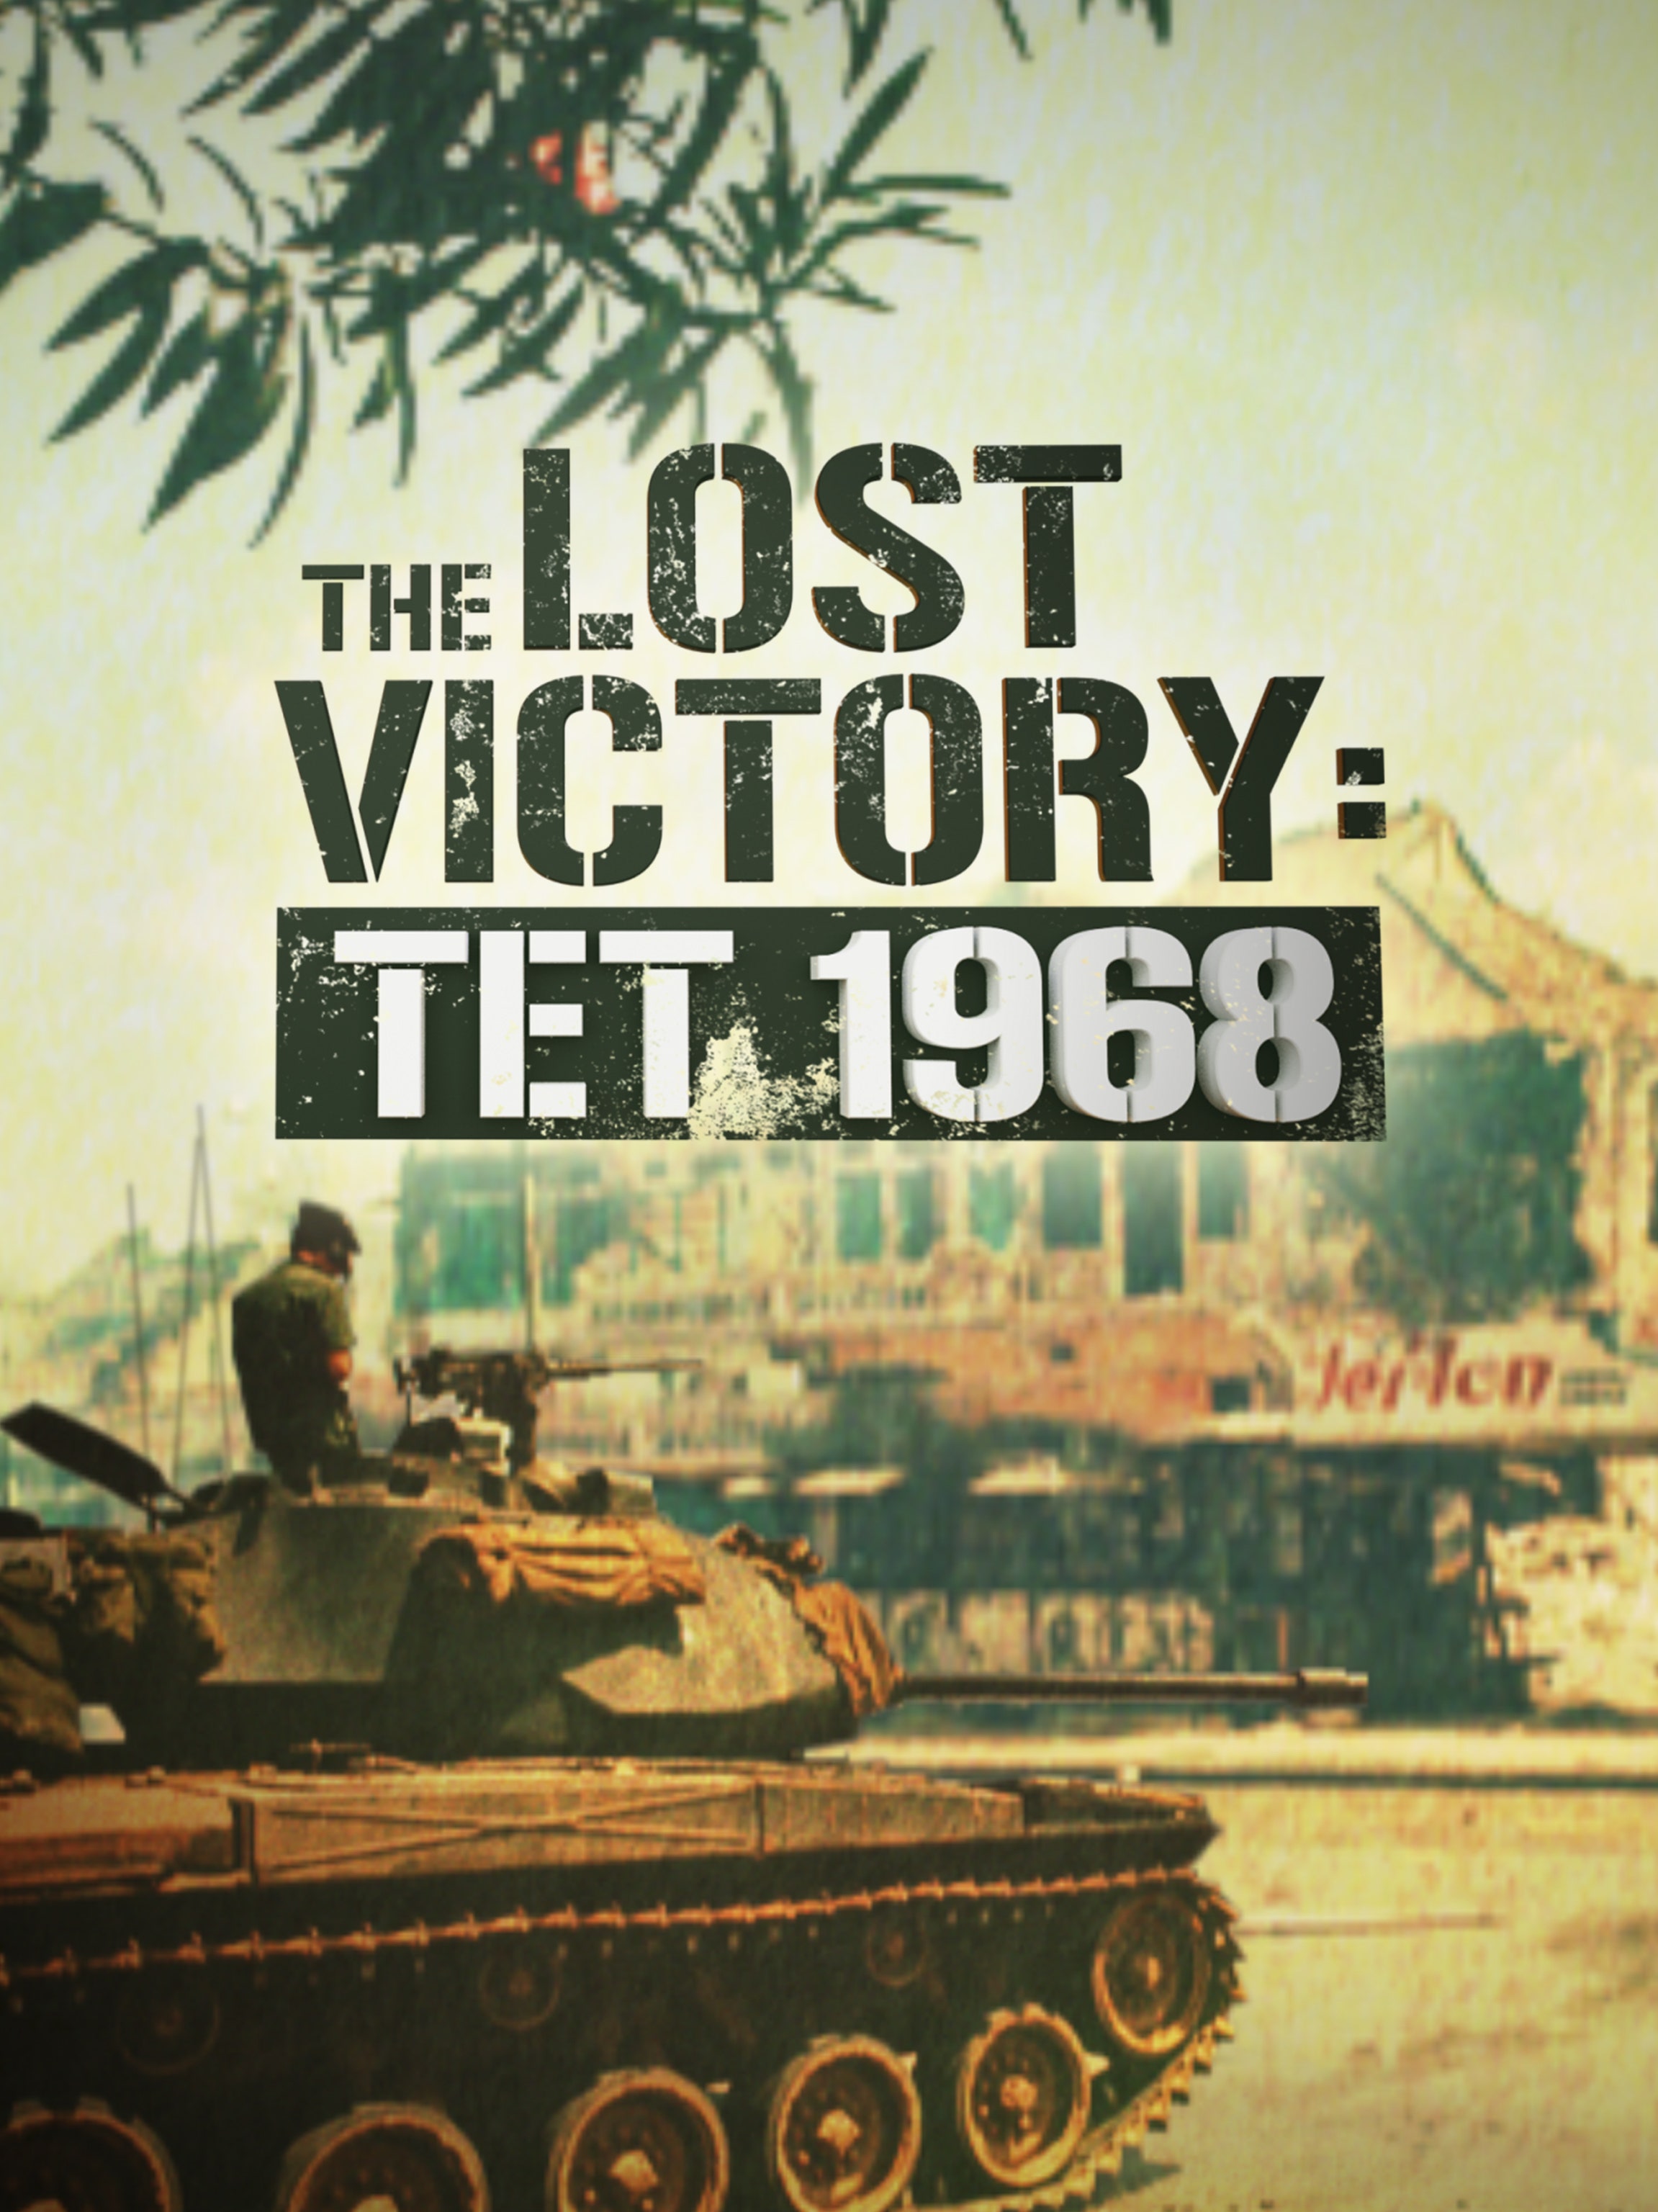 The Lost Victory: Tet 1968! dcg-mark-poster